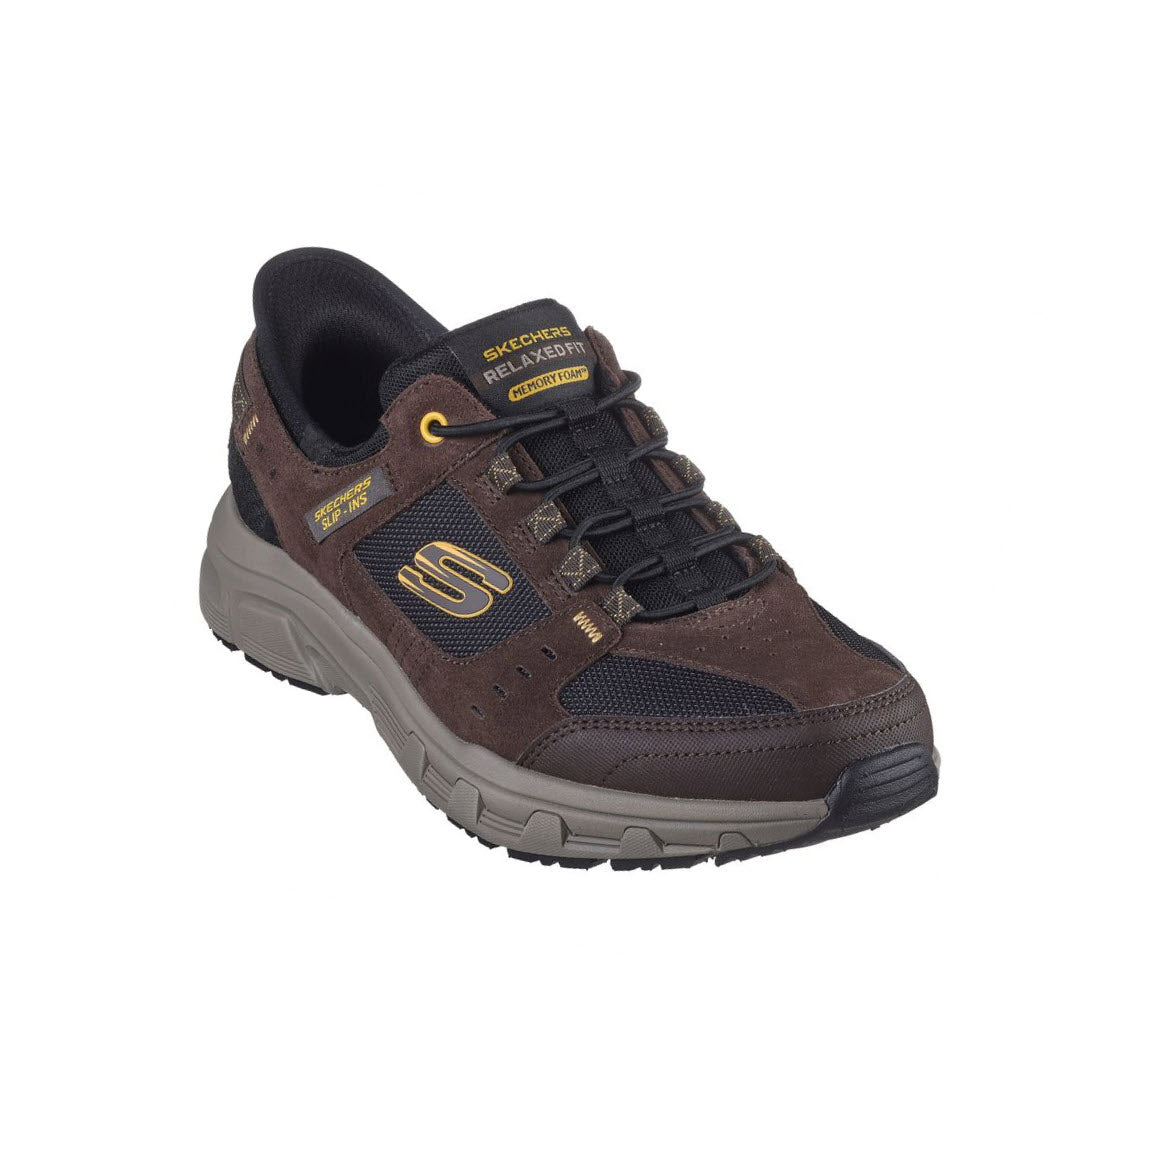 Skechers Oak Canyon Brown Slip-Ins with visible logo, lace-up front, and thick rubber sole, isolated on a white background.